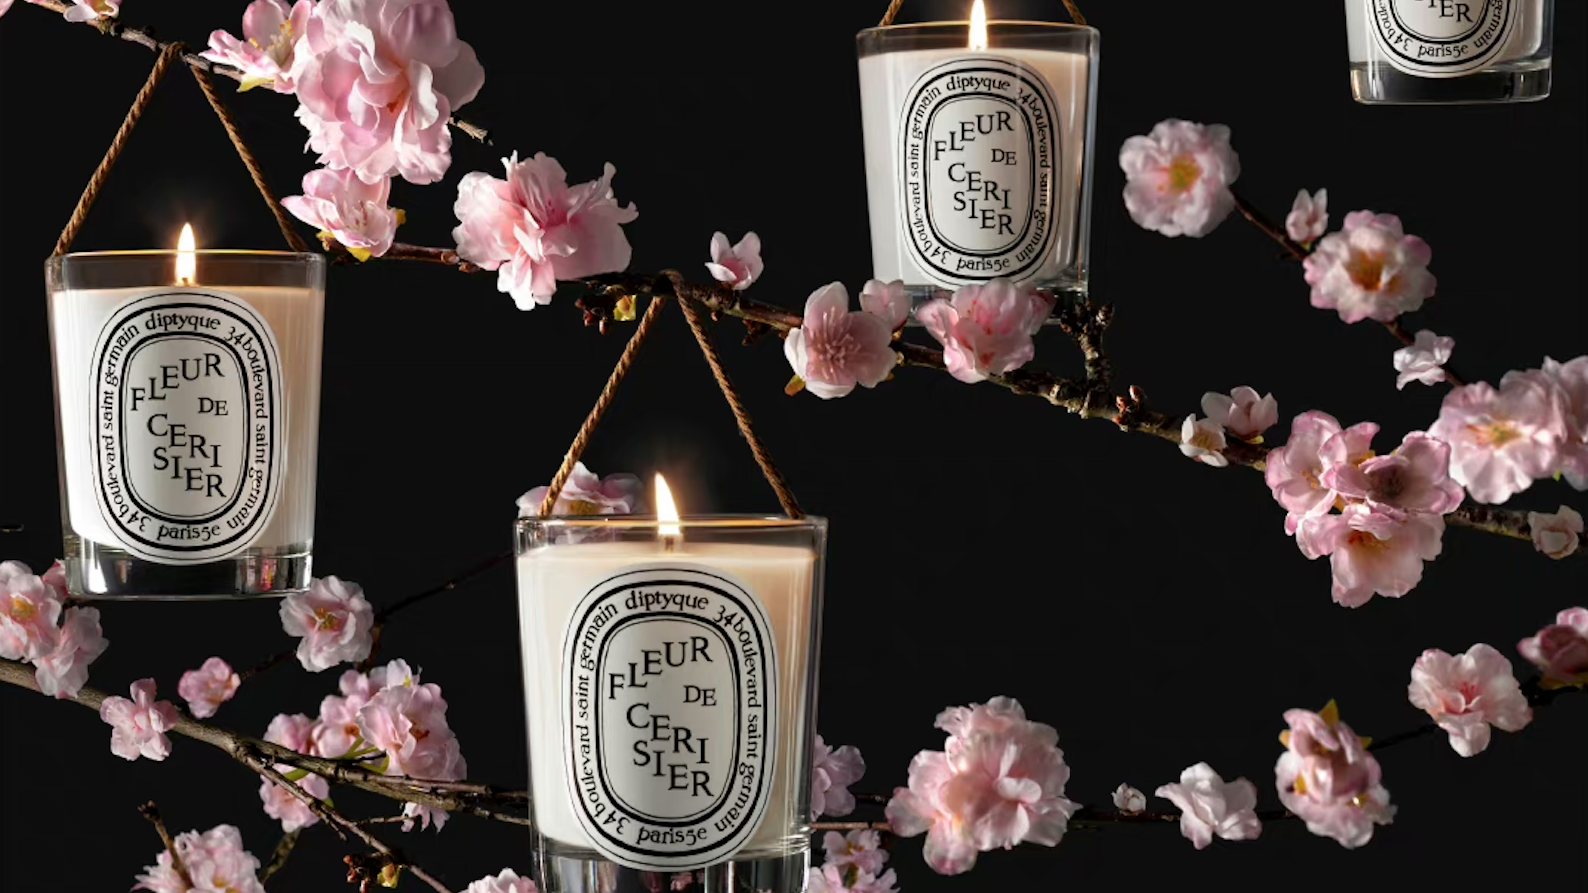 Sakura cherry blossom-themed product sales topped $1 billion this year in China. But do these cherry-pink products and collaborations translate well across luxury? Image: Diptyque Weibo